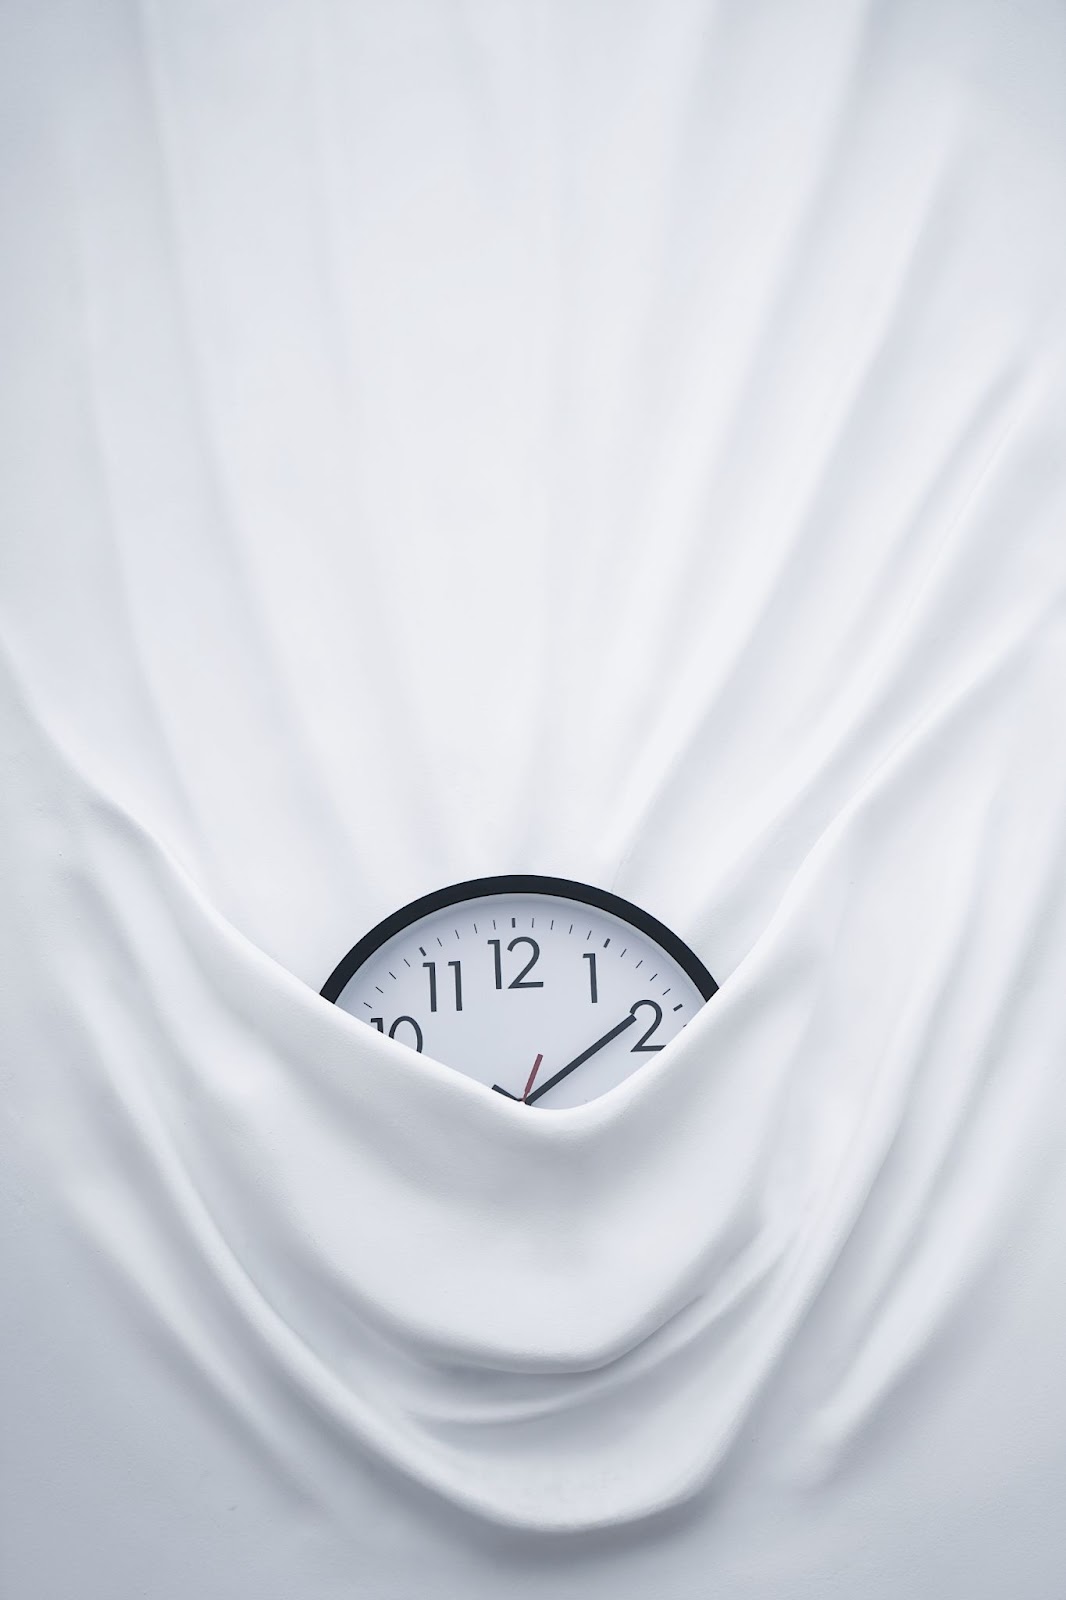 A clock covered partially by a sheet